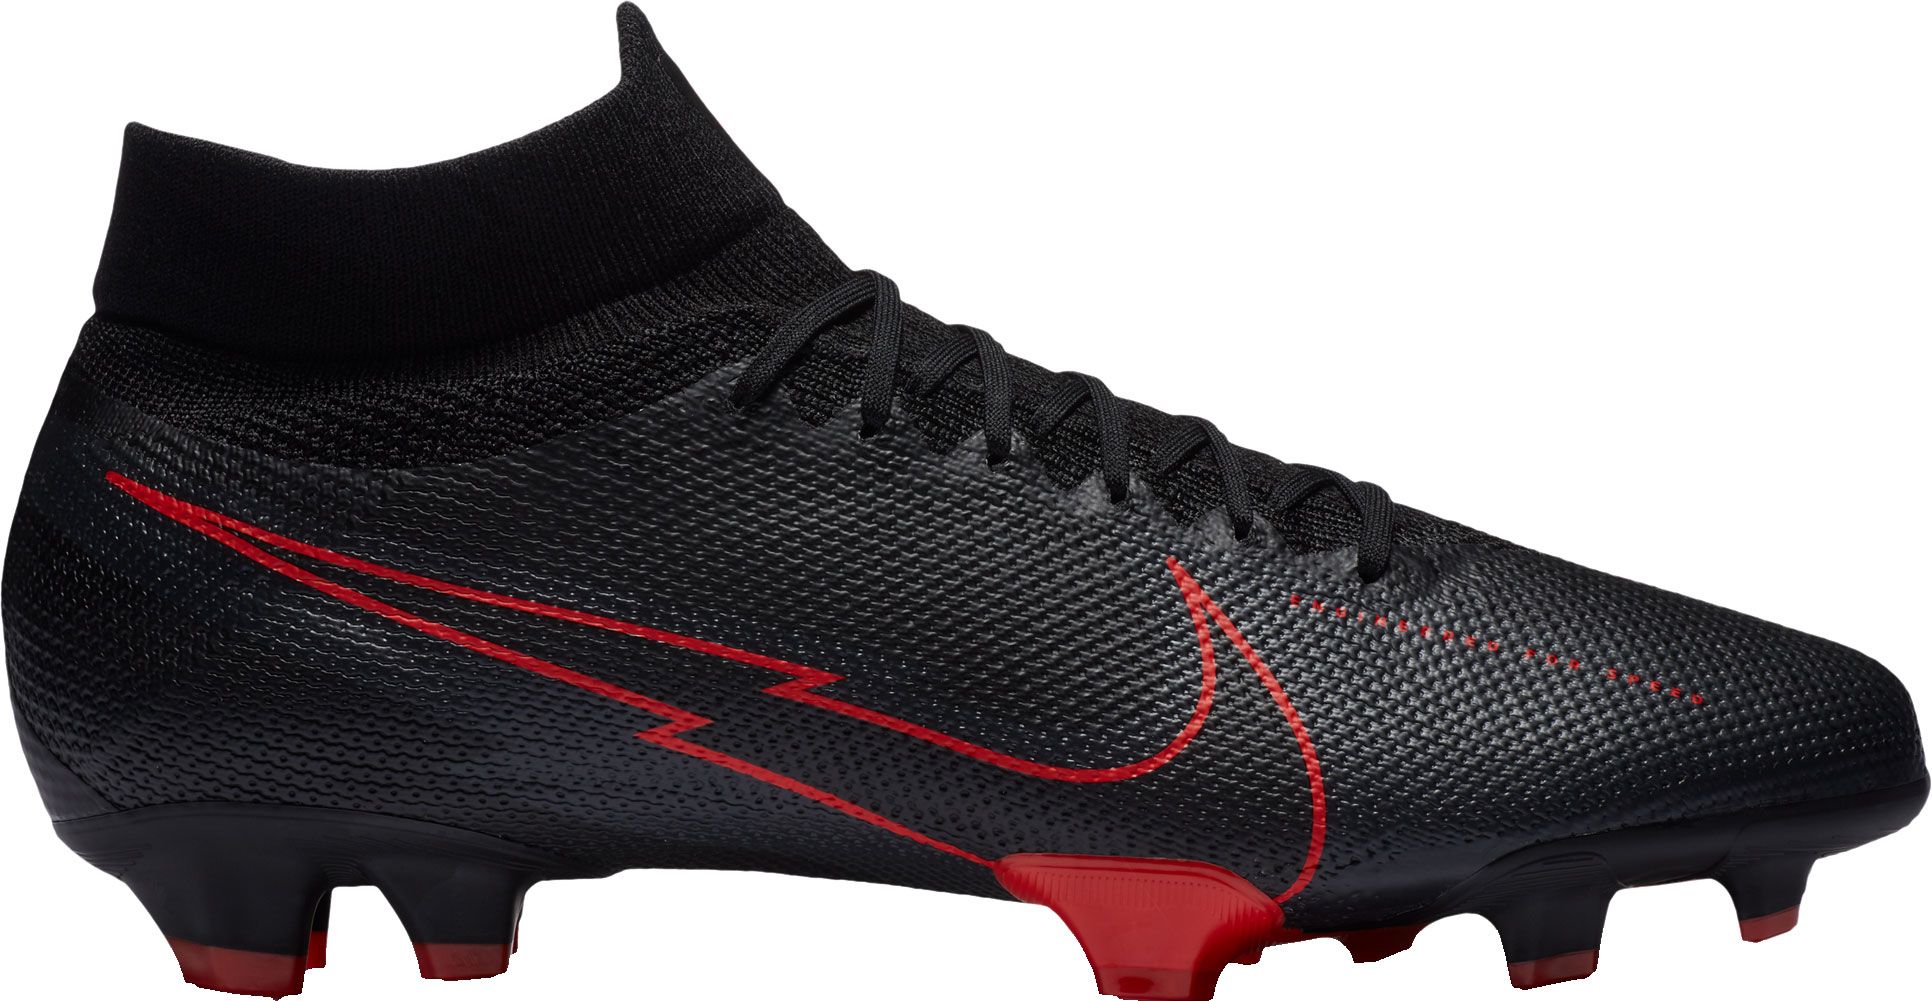 nike mercurial superfly 7 pro fg soccer cleats